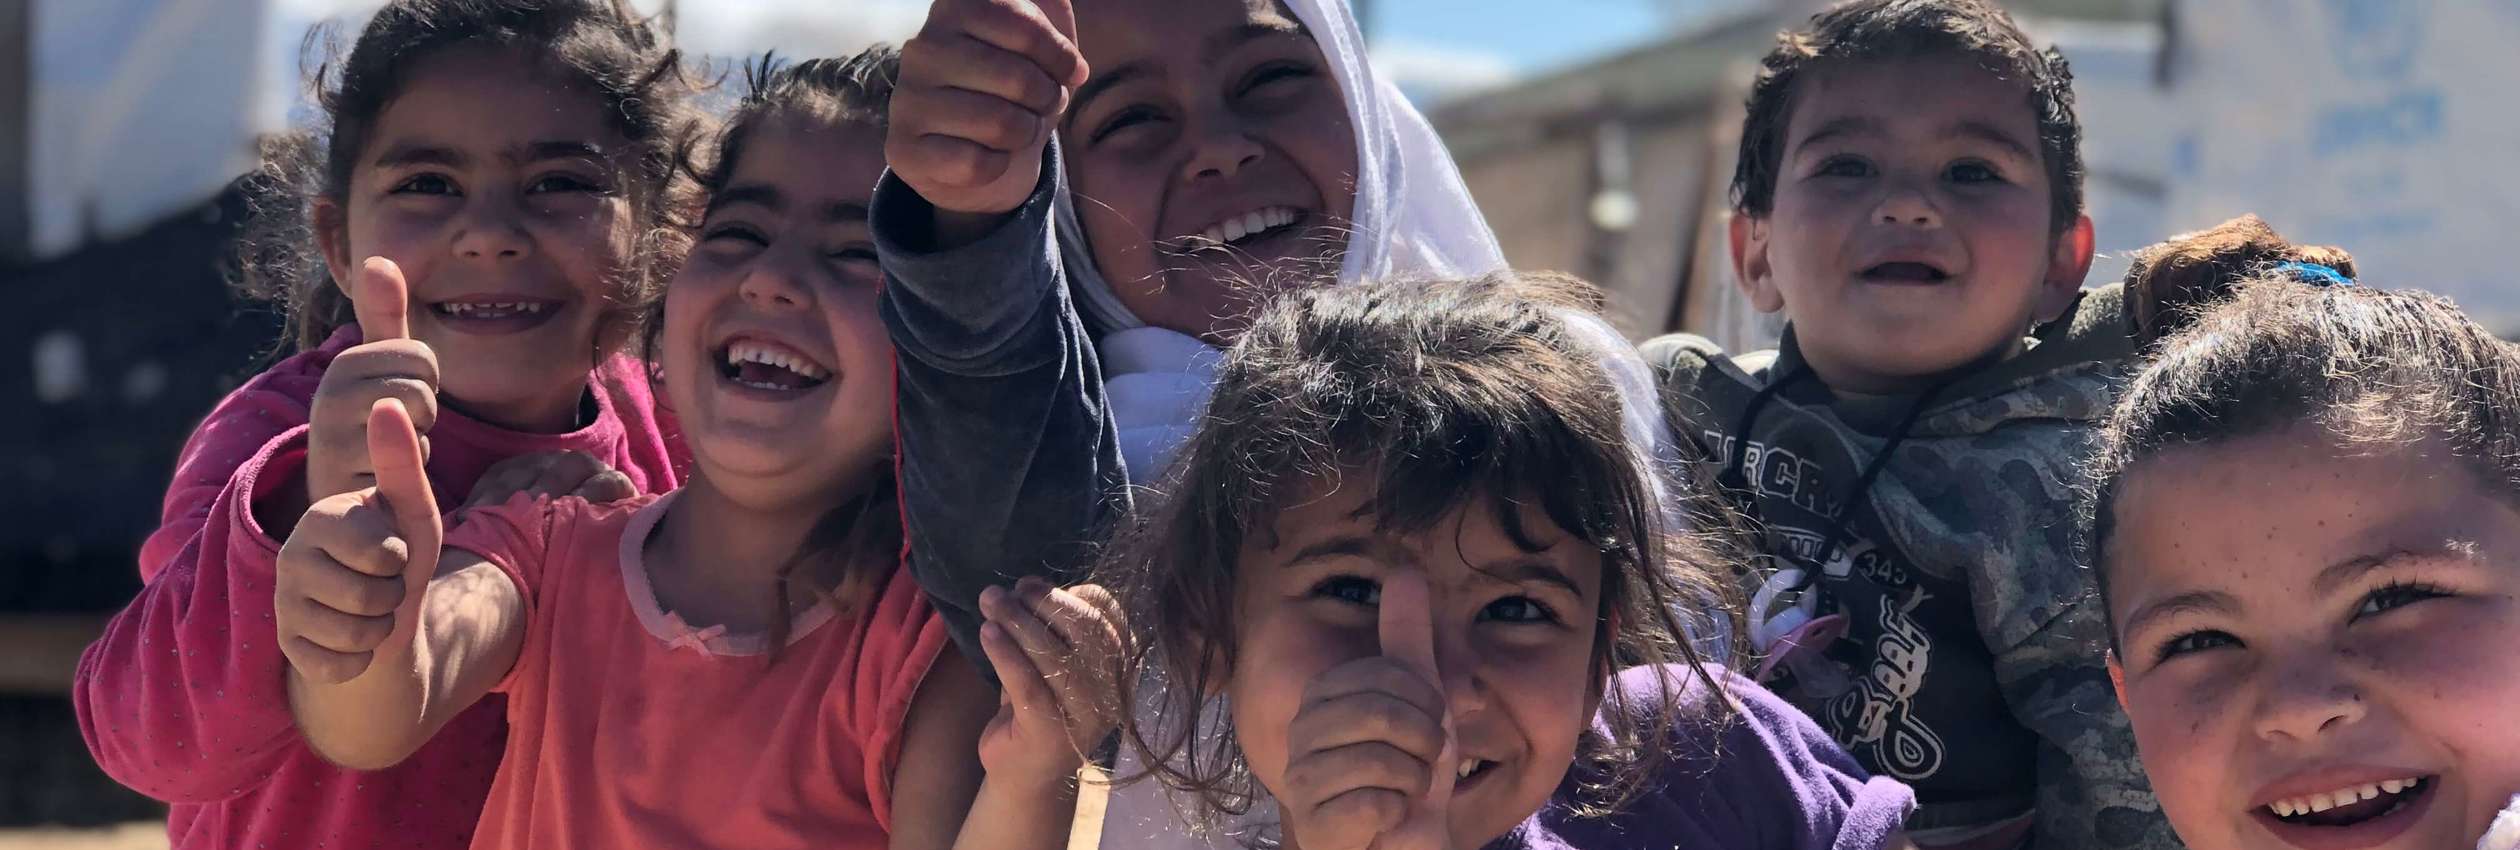 Syrian kids laugh and play at home in their informal settlement in Mhammara, northern Lebanon where 29 families live together with support from UNHCR. 